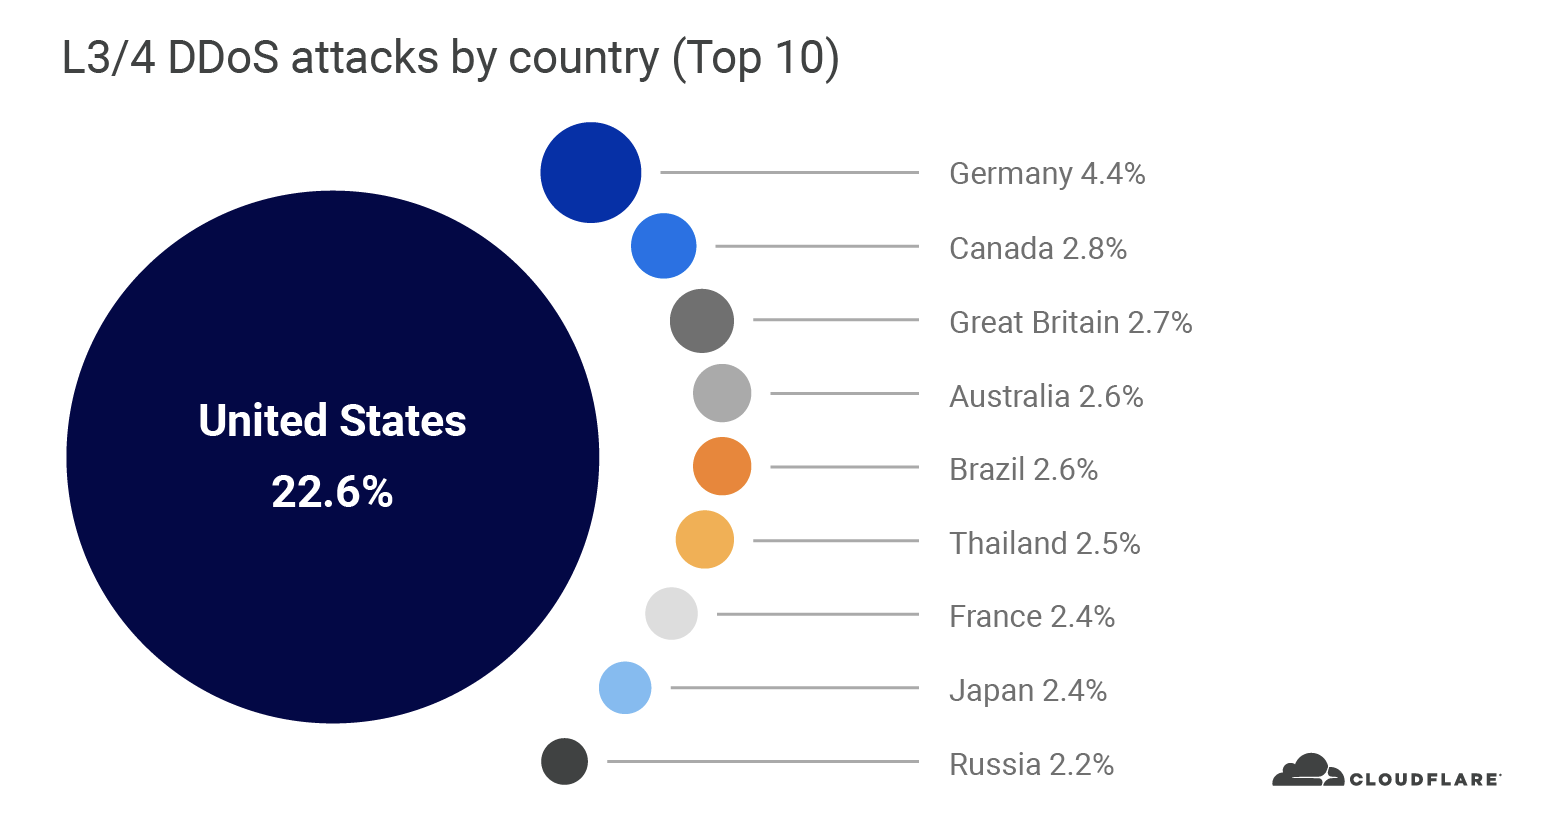 L3:4 DDoS attacks by country